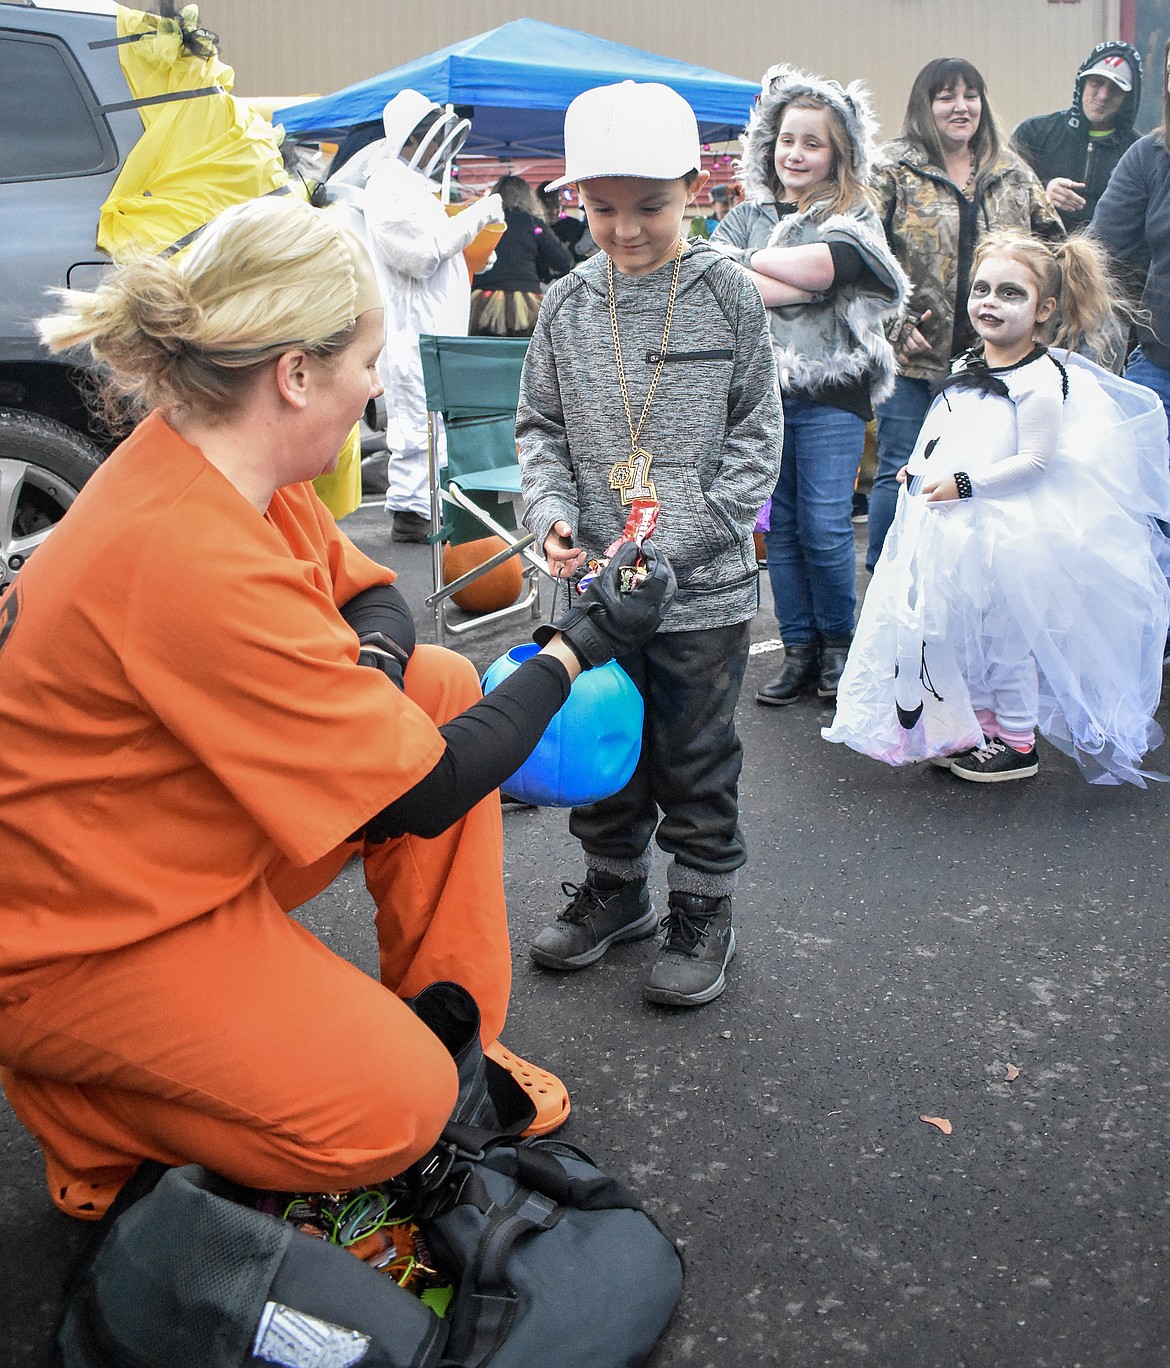 Troy Police Chief Katie Davis took on a persona on the other side of the law to hand out candy to Ben Powers and an eager line of trick-or-treaters at Trunk-or-Treat at the Troy Activity Center Wednesday. (Ben Kibbey/The Western News)